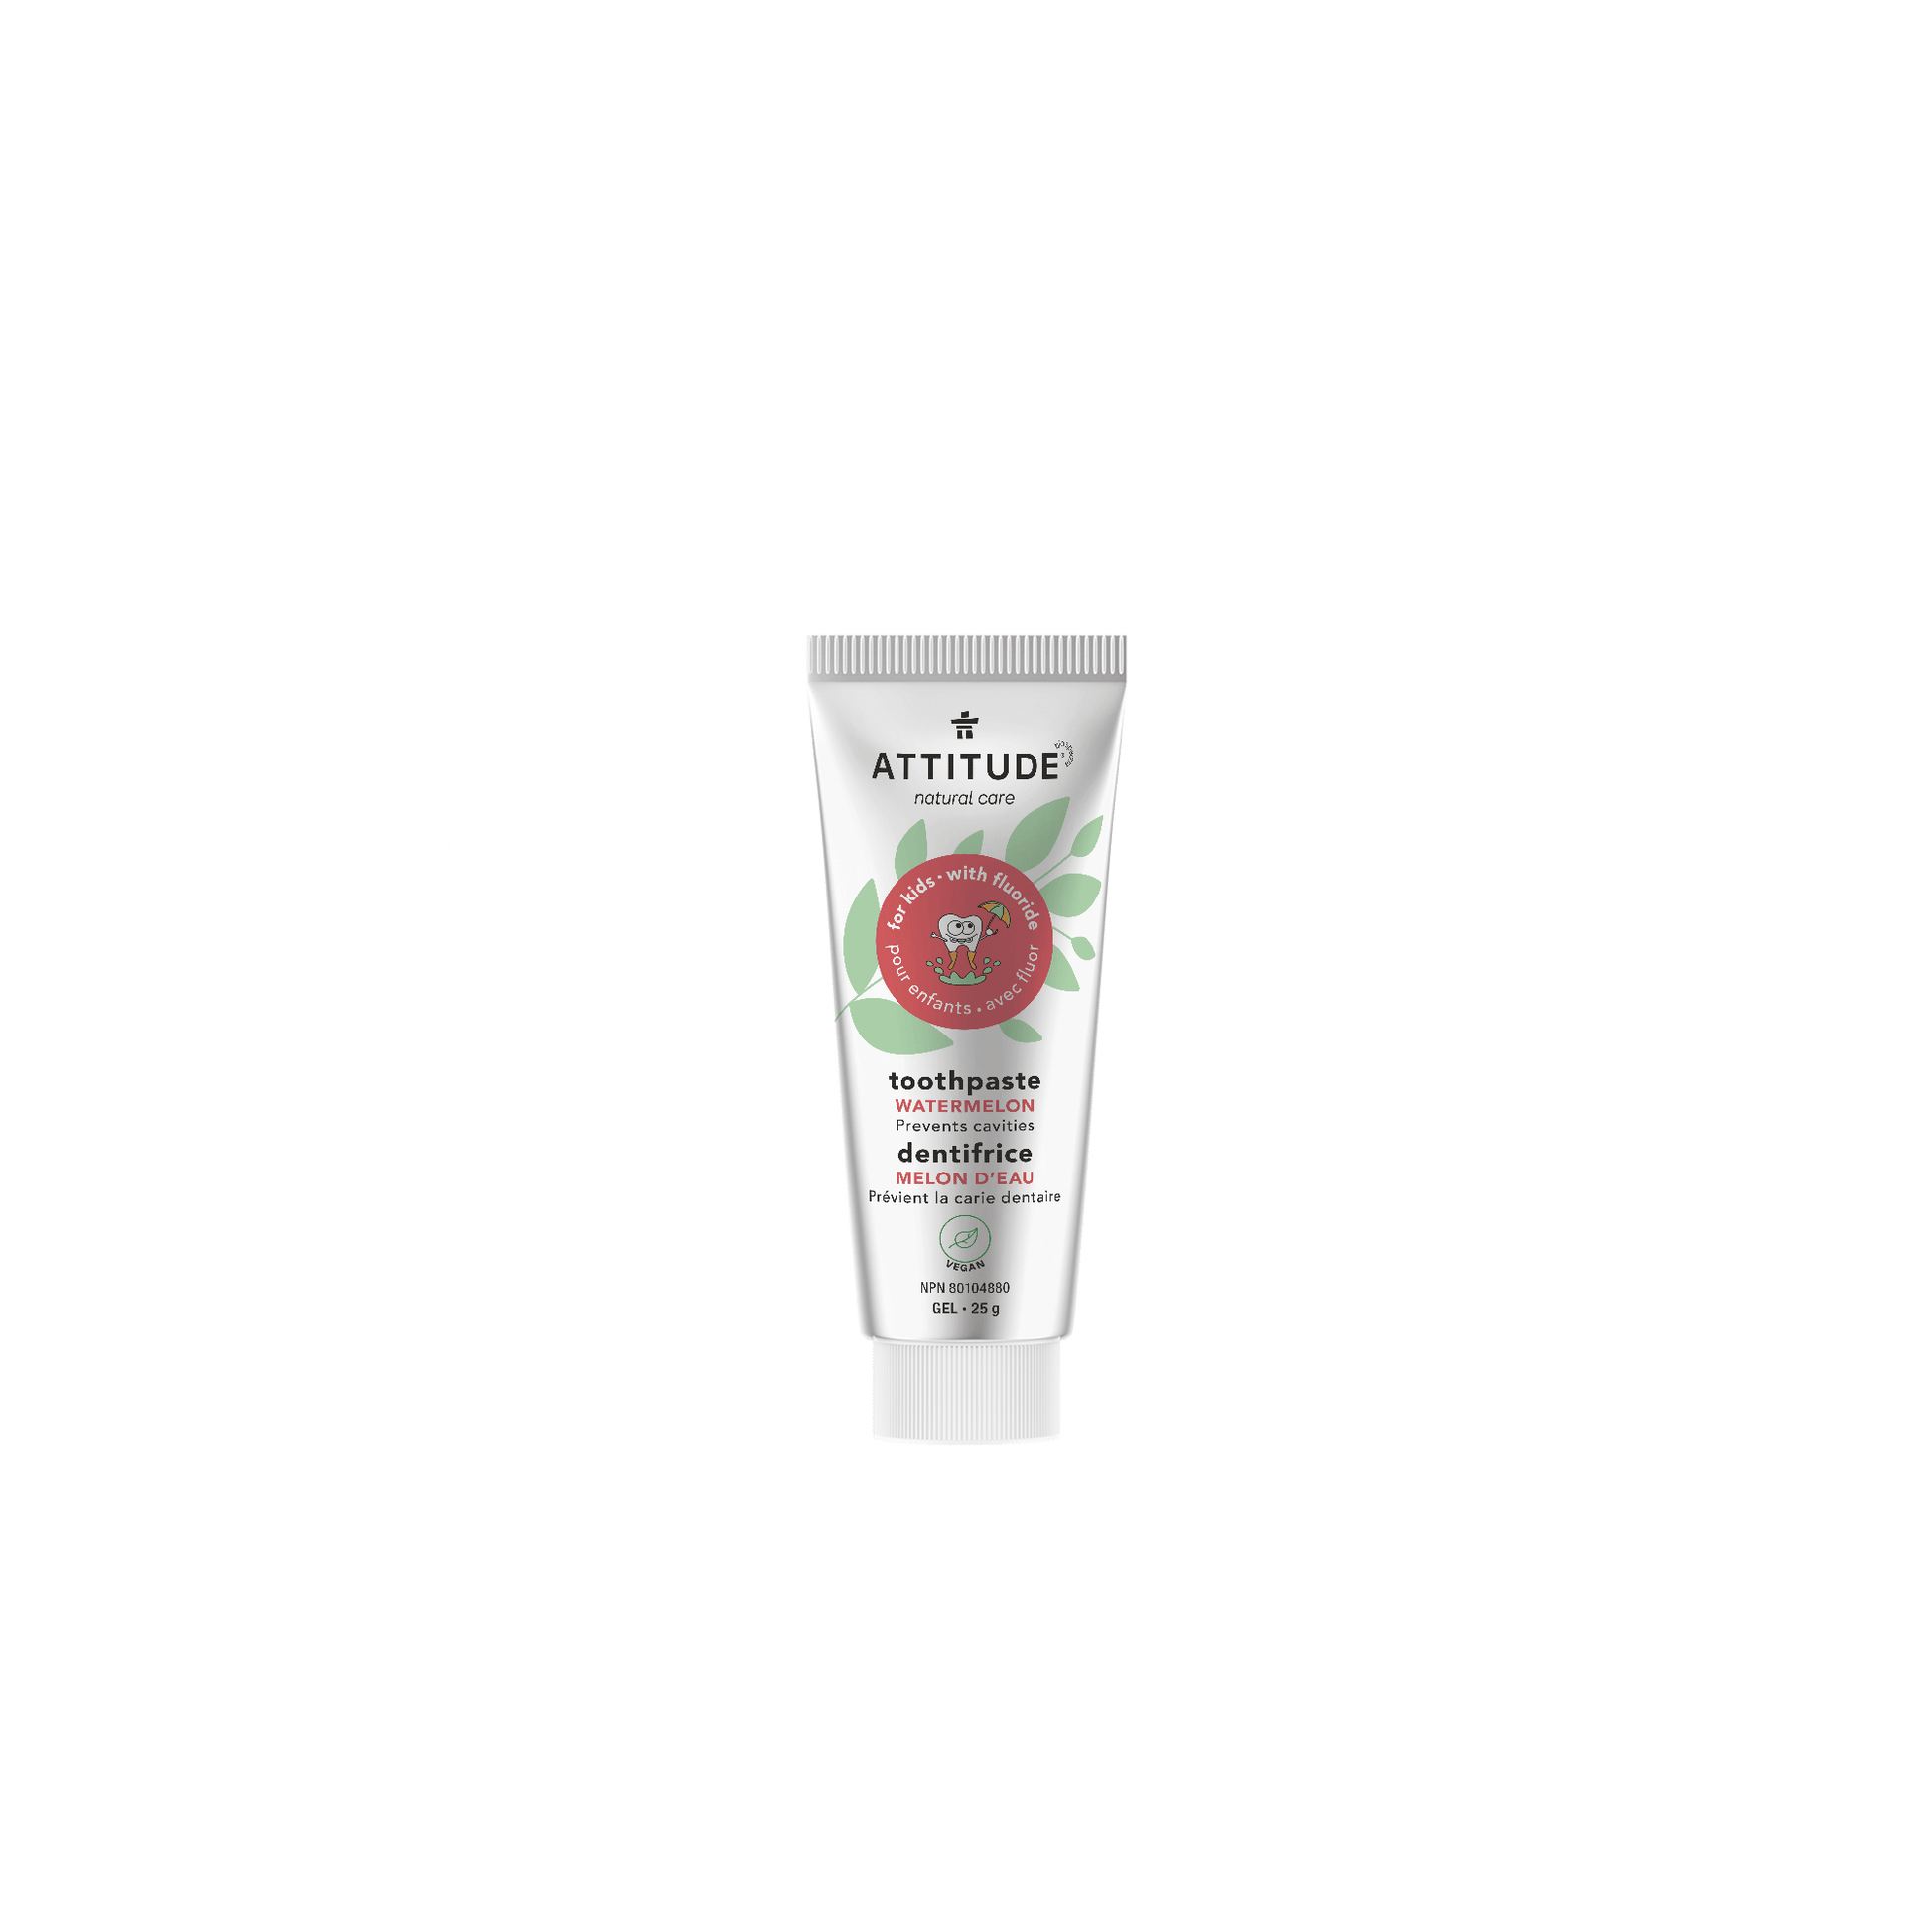 ATTITUDE Travel size Toothpaste with fluor for kids Watermelon_en?_main? 25g Watermelon